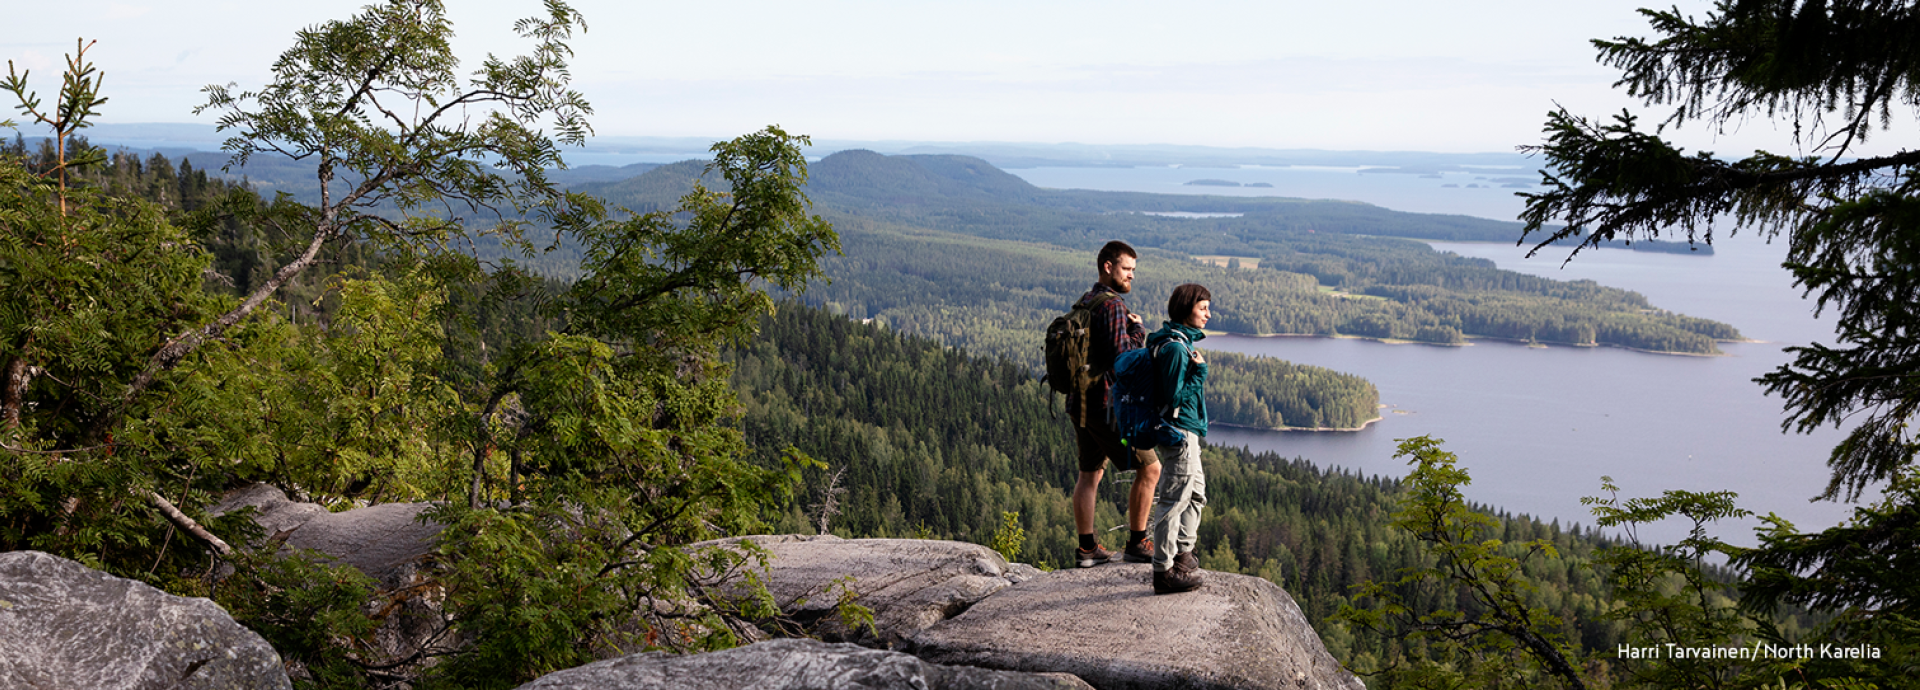 Two people standing on a hill at Koli National Park looking at the lake view